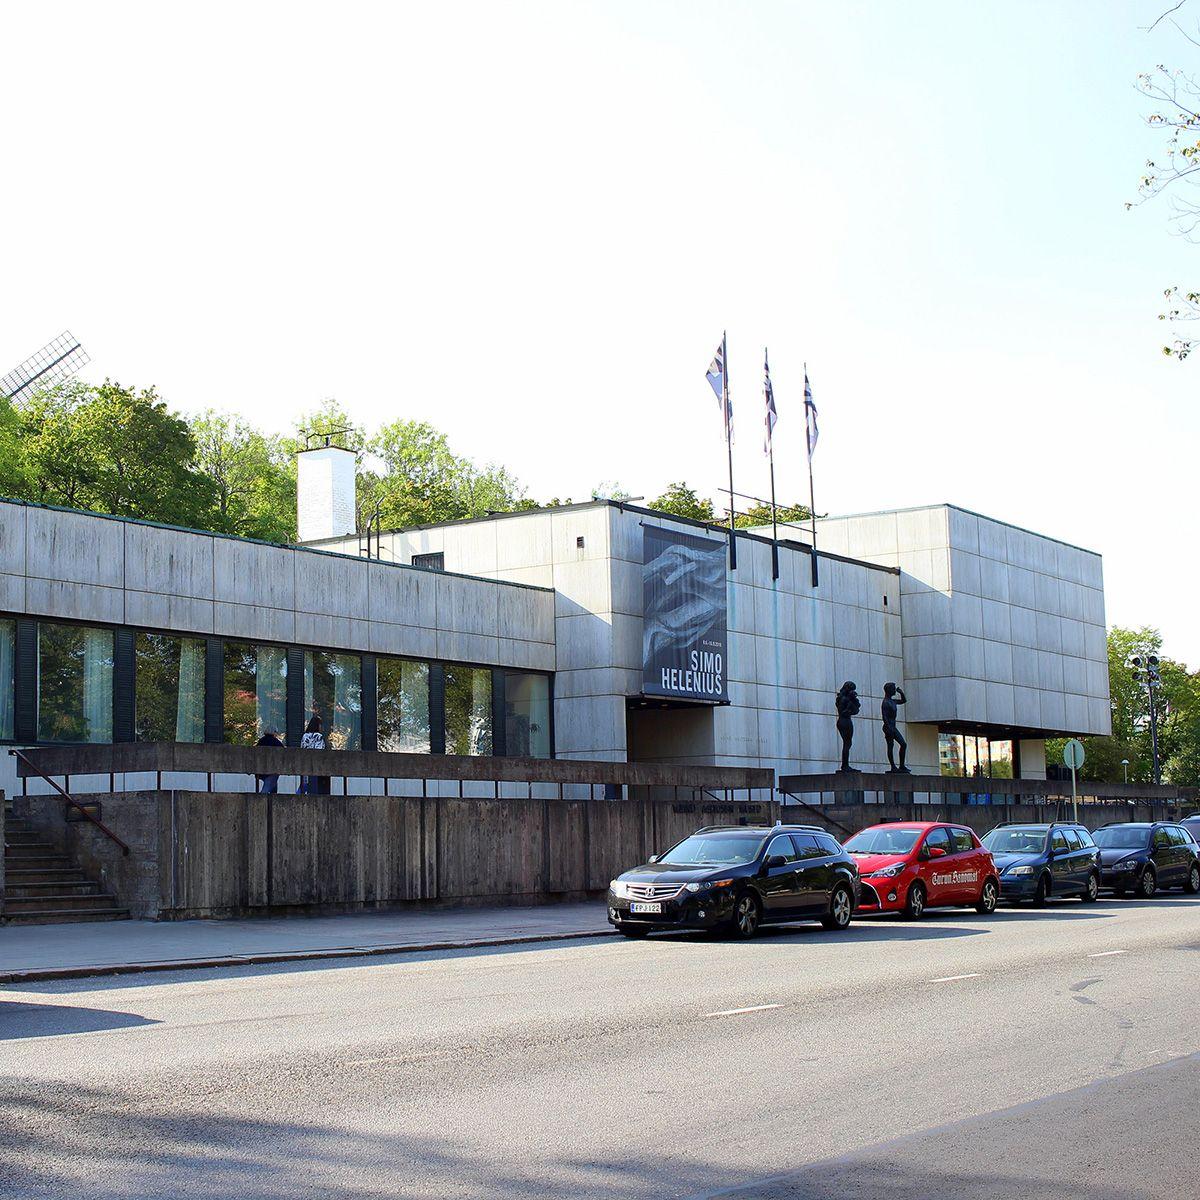 A view from the street outside Wäinö Aaltonen Museum, lined with cars and statues.